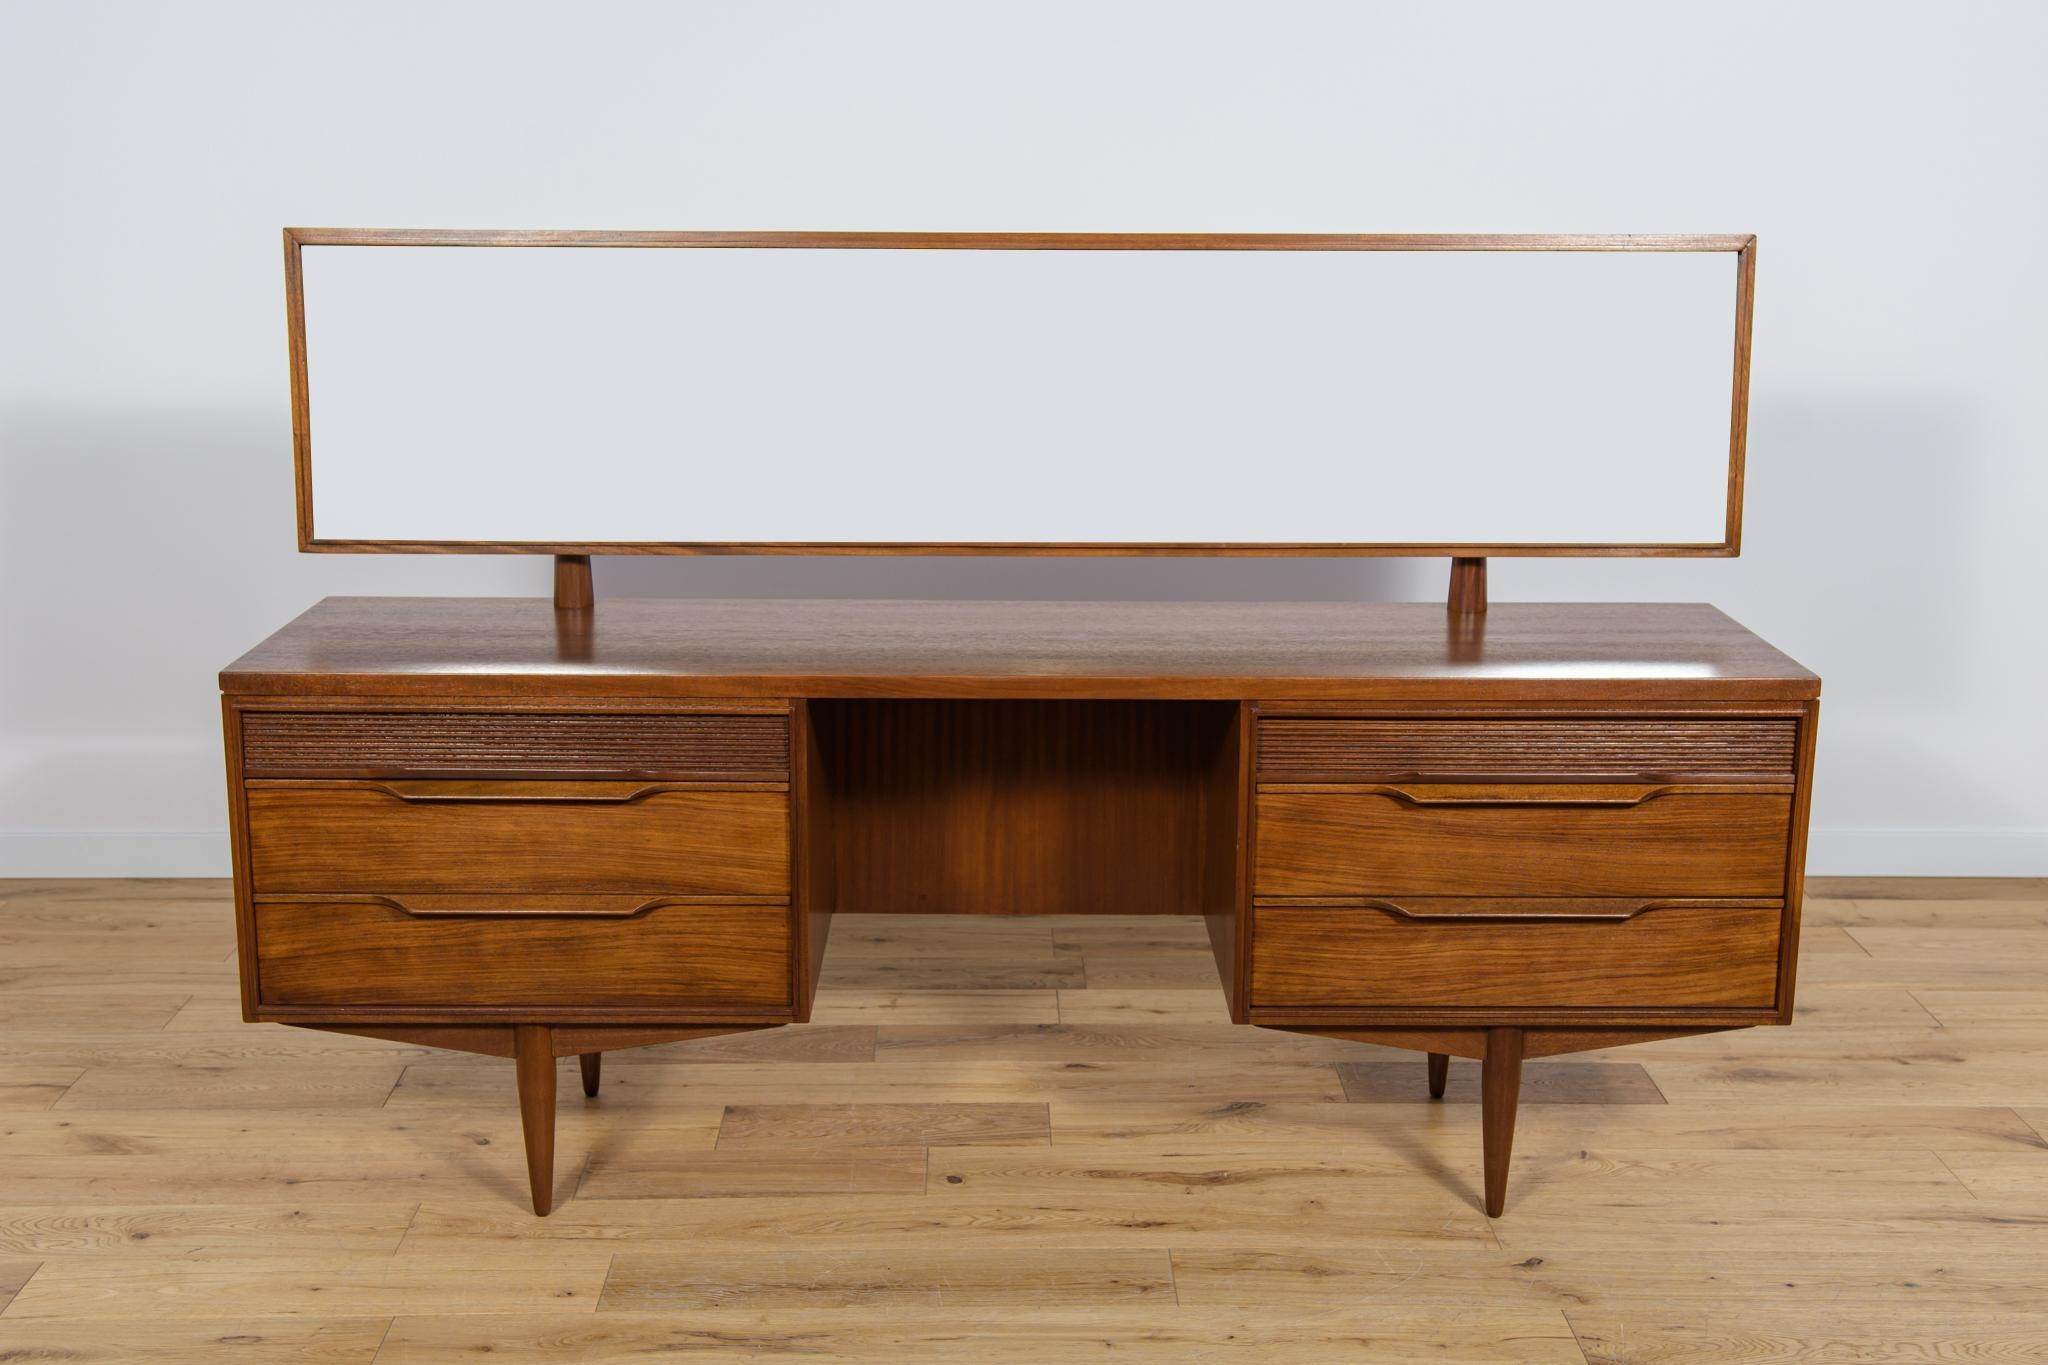 A dressing table manufactured in the British White and Newton factory in the 1960s in Portsmouth. A piece of furniture made of teak. On both sides of the dressing table there are cabinets with three drawers (the upper drawers are grooved) with